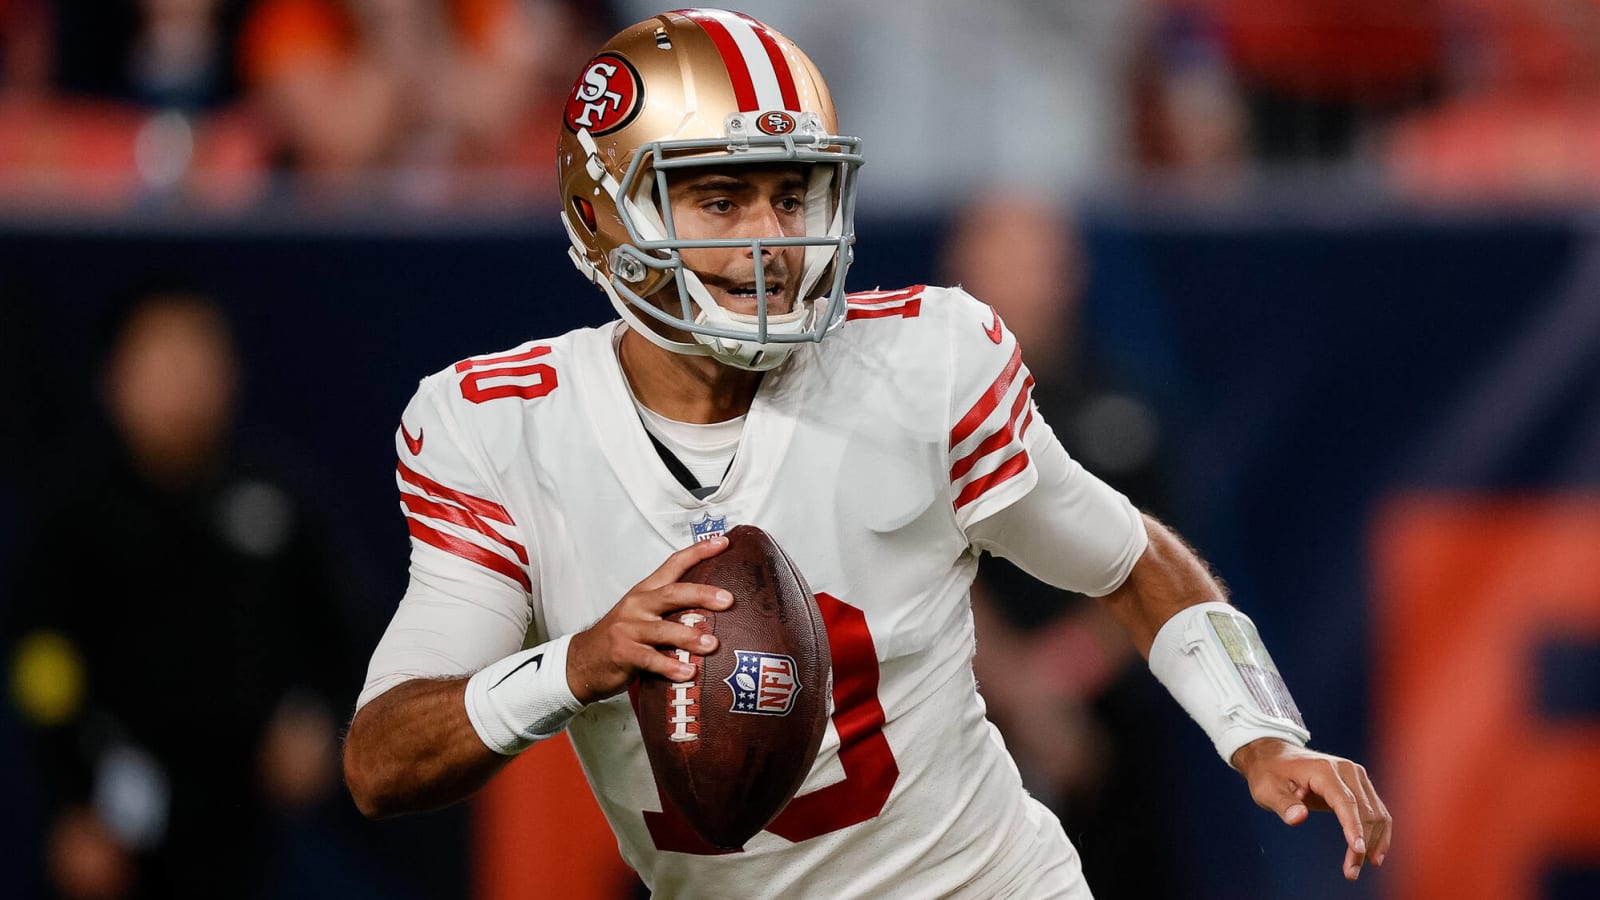 Asking price, health why Panthers didn't trade for Garoppolo?